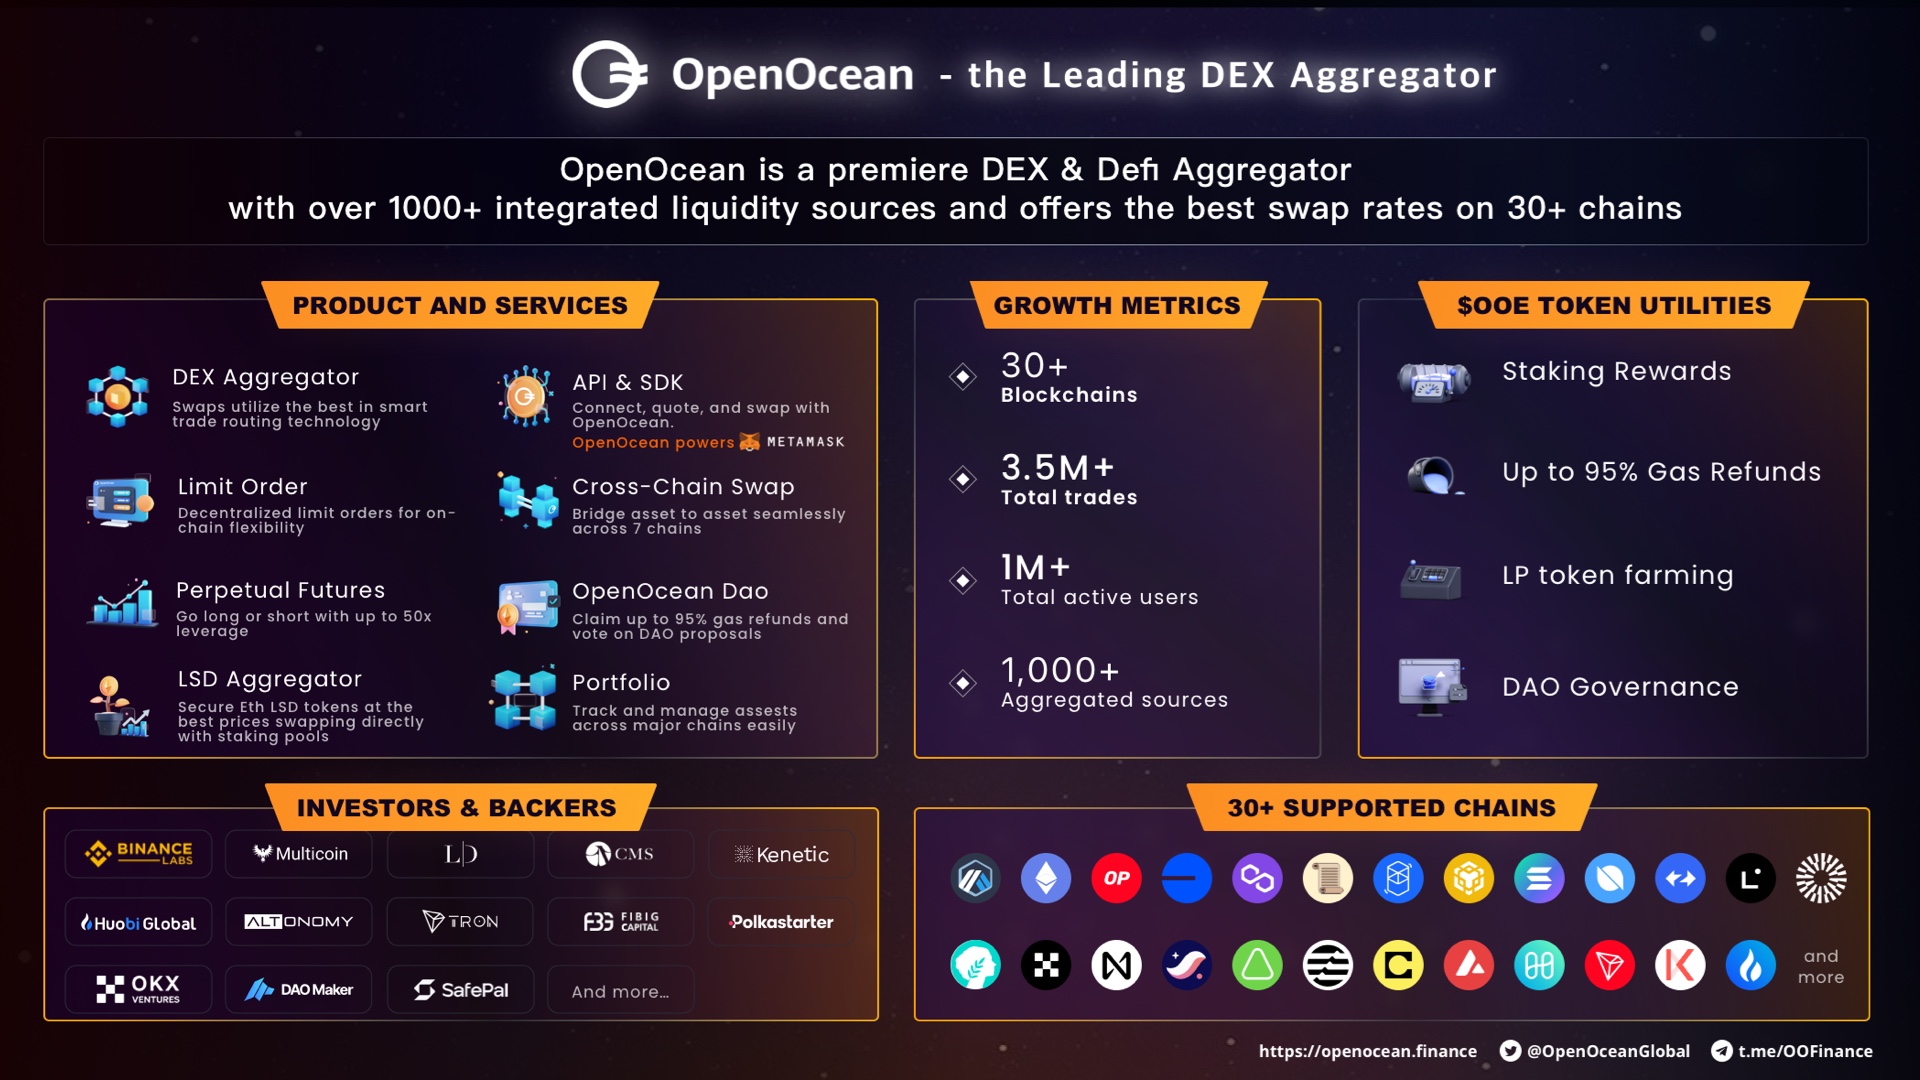 OpenOcean Token: An Undervalued Gem in DeFi, Aiming for a 70x Increase to $2